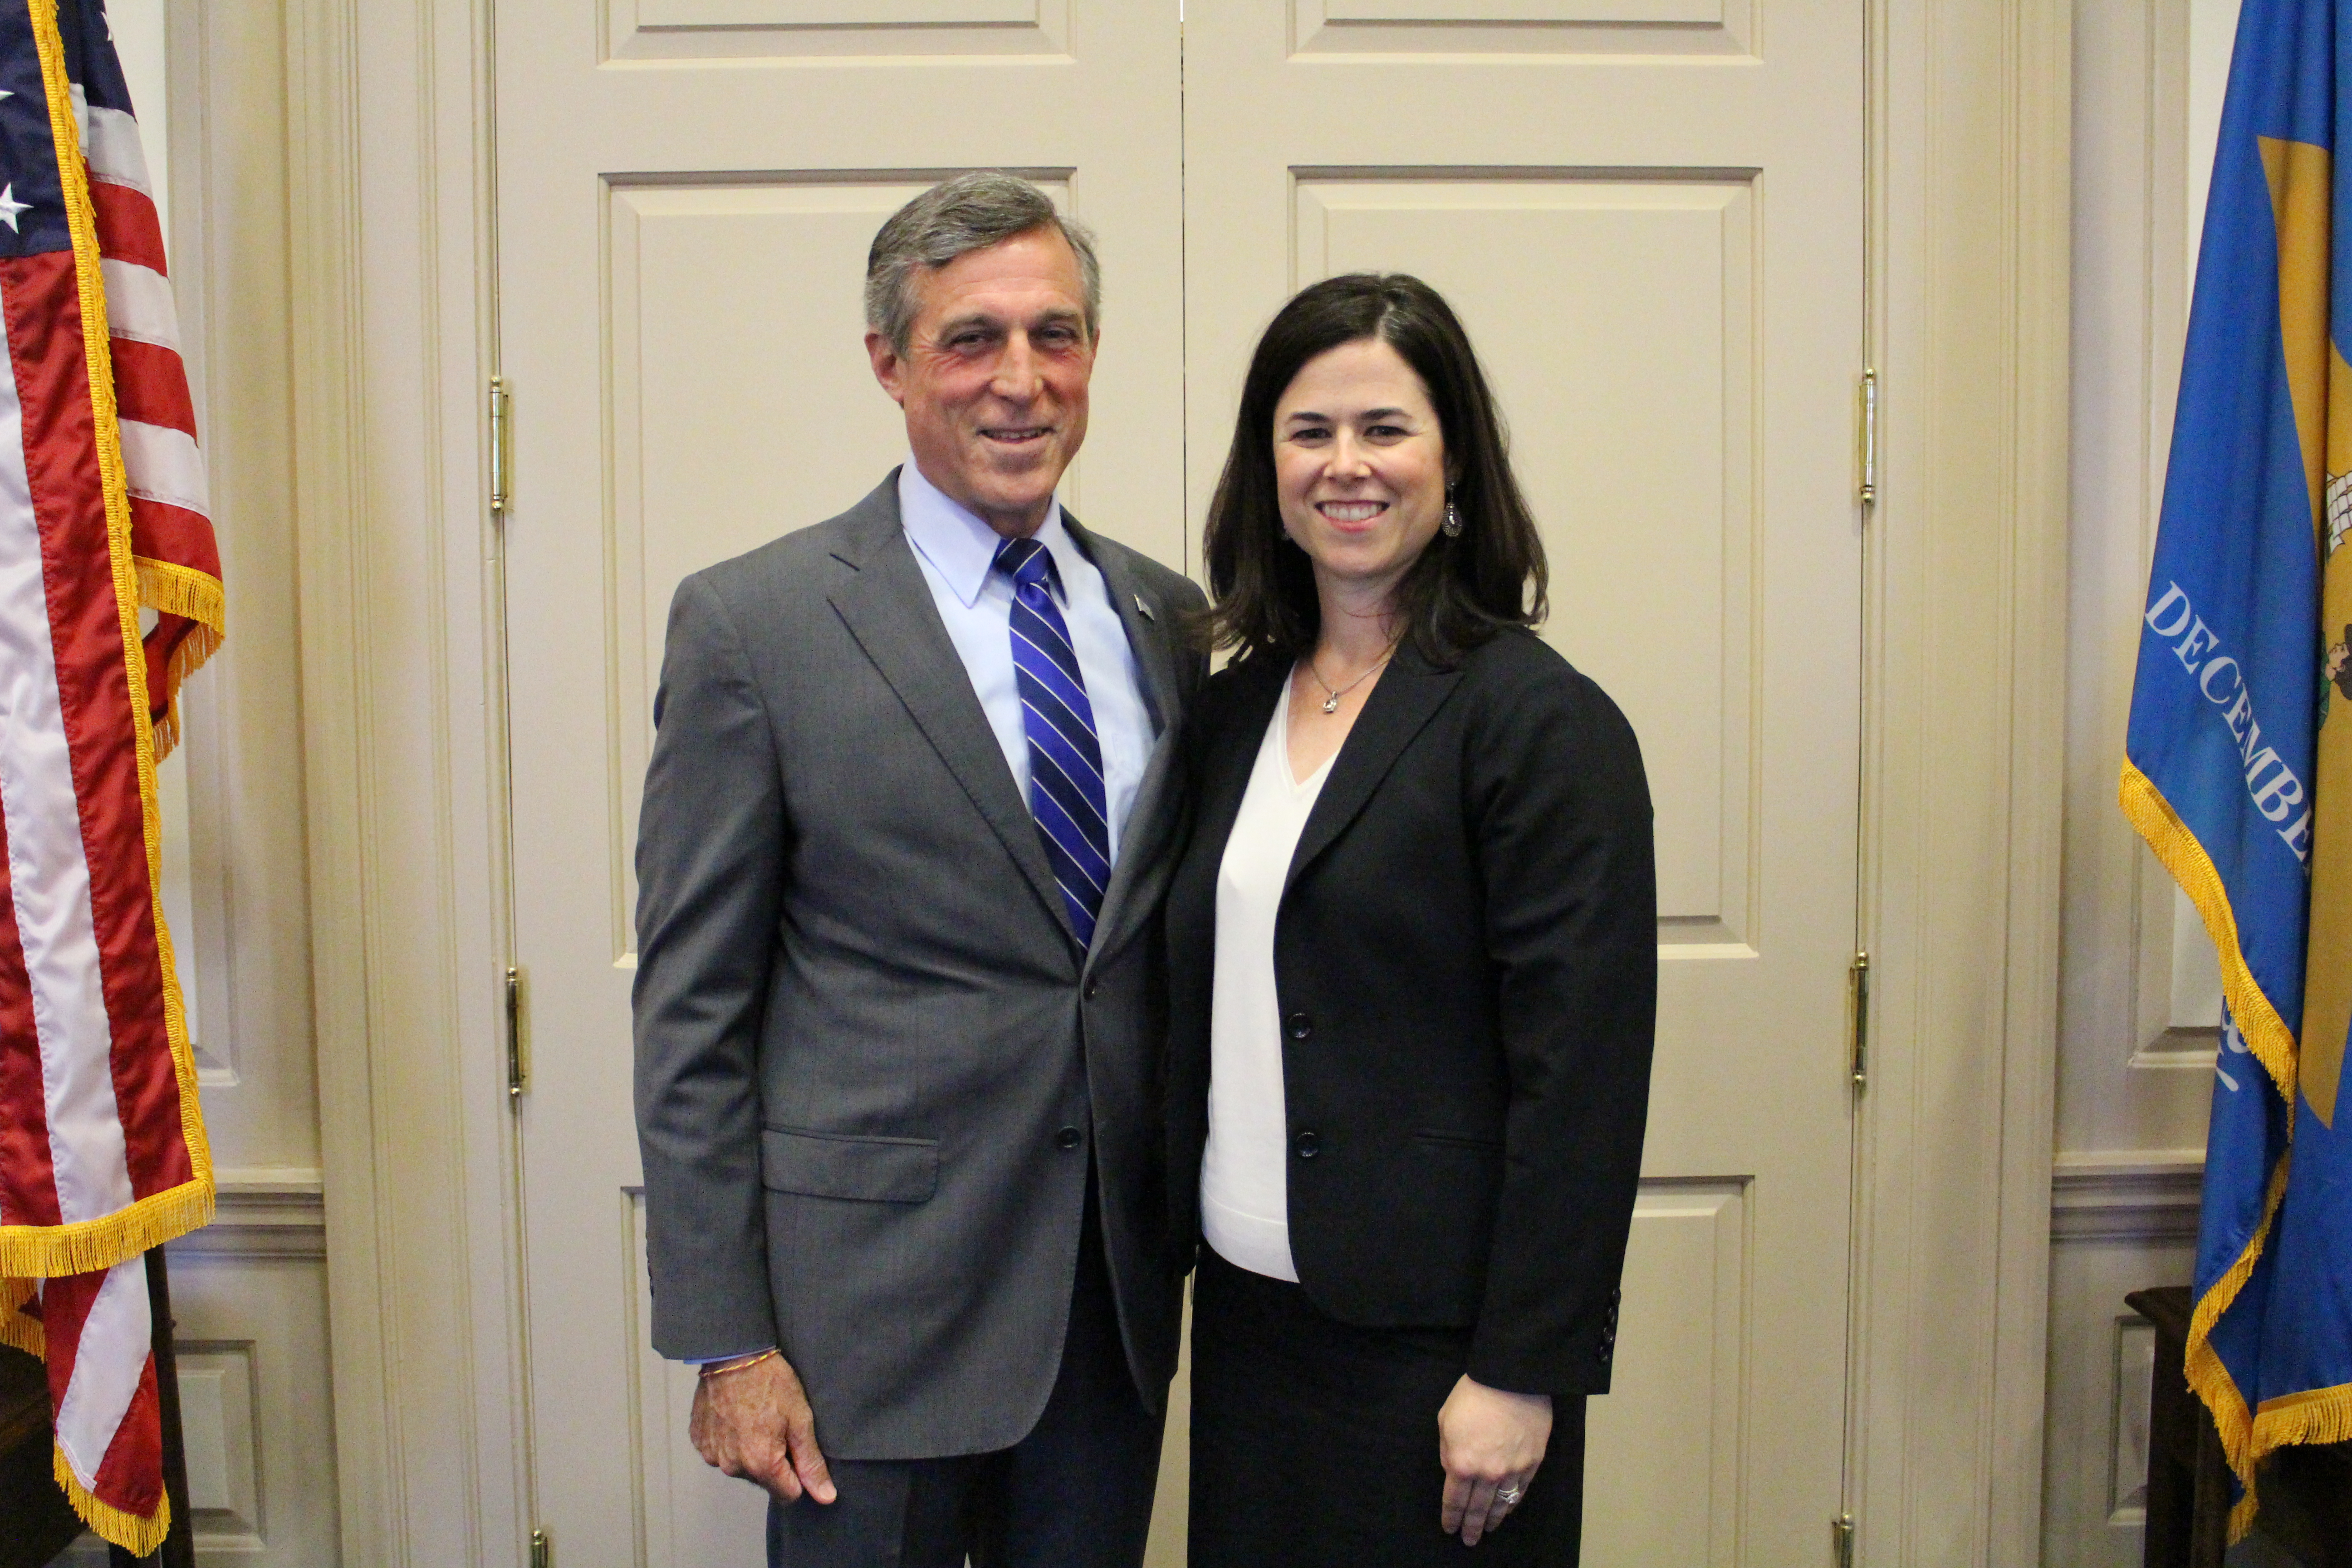 Governor Carney and Meghan Adams Perry